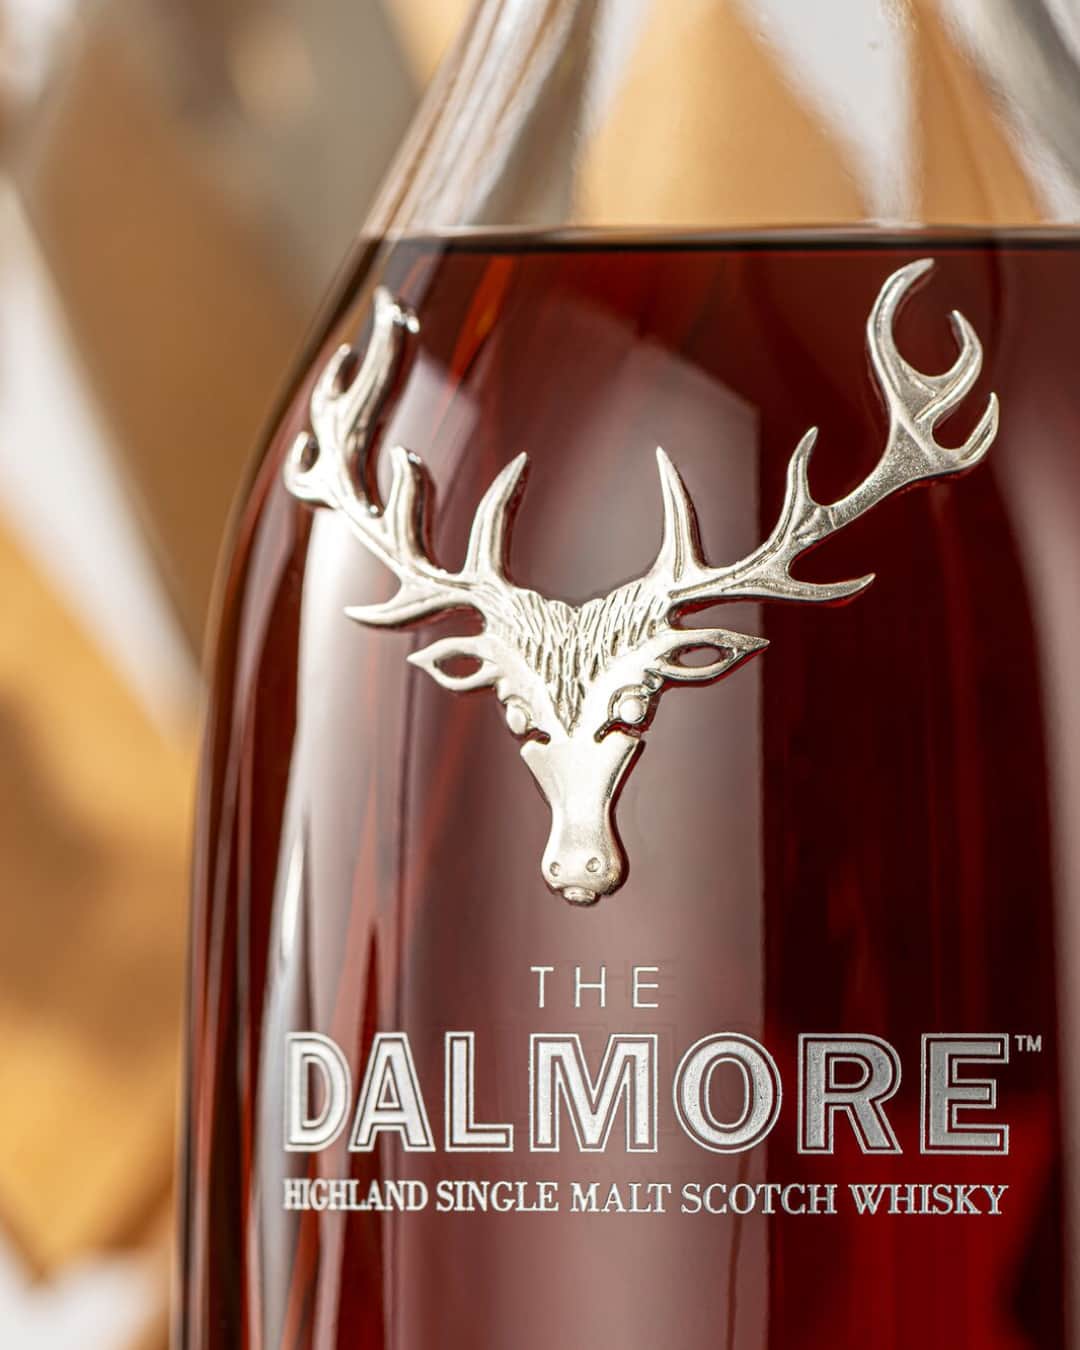 The Dalmoreのインスタグラム：「Nurtured by Master Distiller Richard Paterson OBE over 48 years, using a unique assemblage of rare and aged Dalmore whisky with influences from Oloroso and Apostoles sherry, Vintage Port and American White Oak.  This immensely scarce and valuable whisky was then finished in Scottish Tay Oak taken from a wind felled tree which previously stood on the banks of the River Tay (by the V&A Dundee) and Japanese Oak casks air-dried at The Dalmore Distillery for years.  “A great single malt is a work of art. It is all about emotion. It takes years to nurture the spirit, before you finally see what it truly is: a work of art, sheer perfection.” - Richard Paterson OBE」